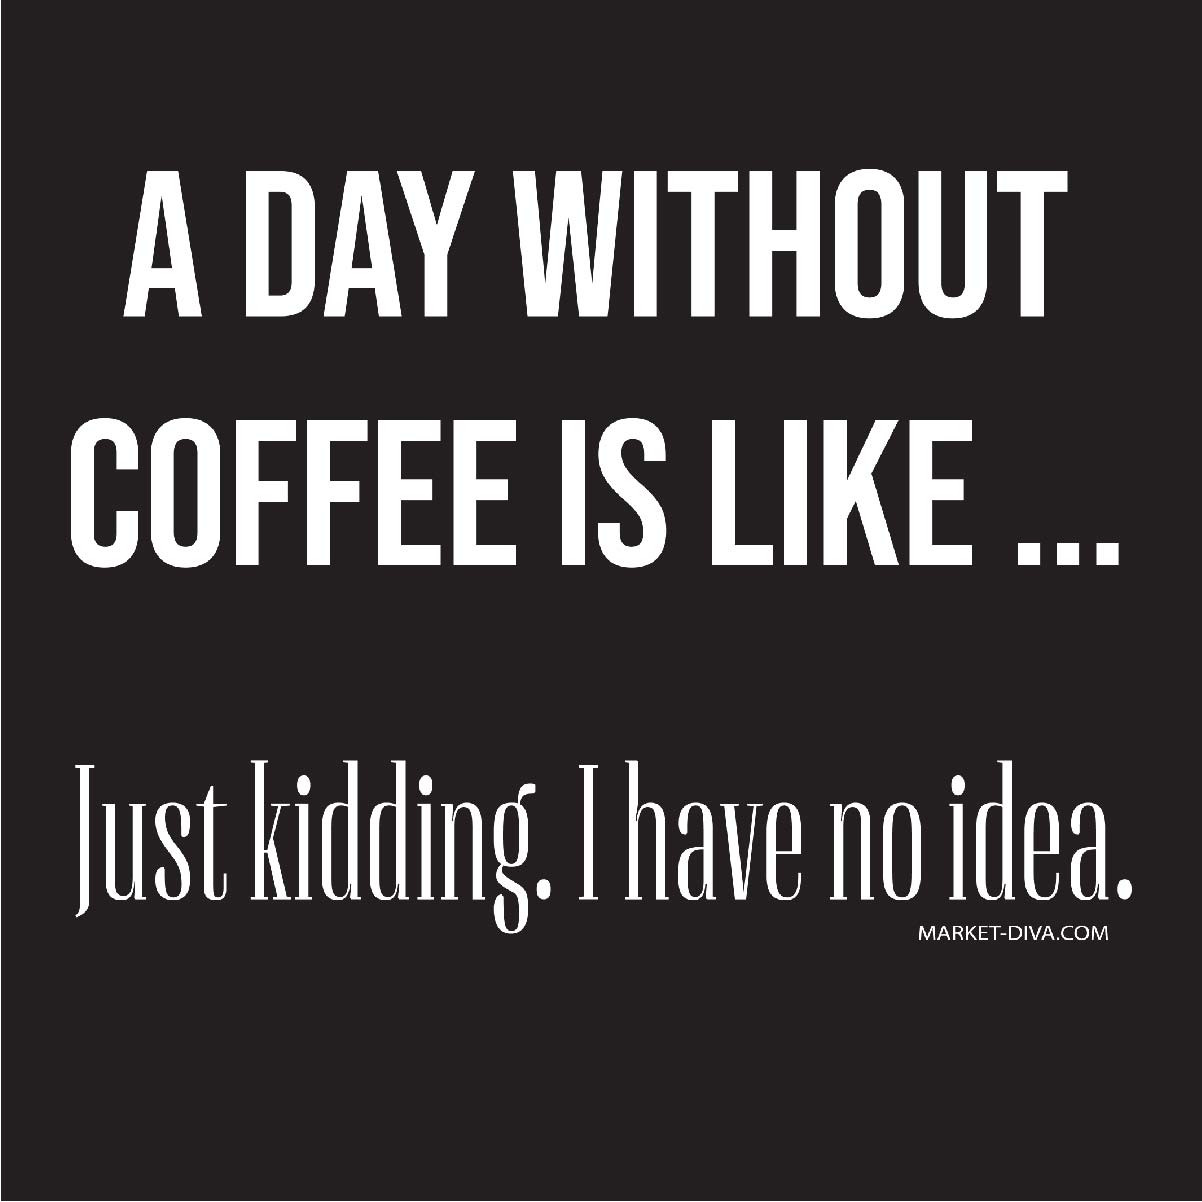 A Day Without Coffee - No